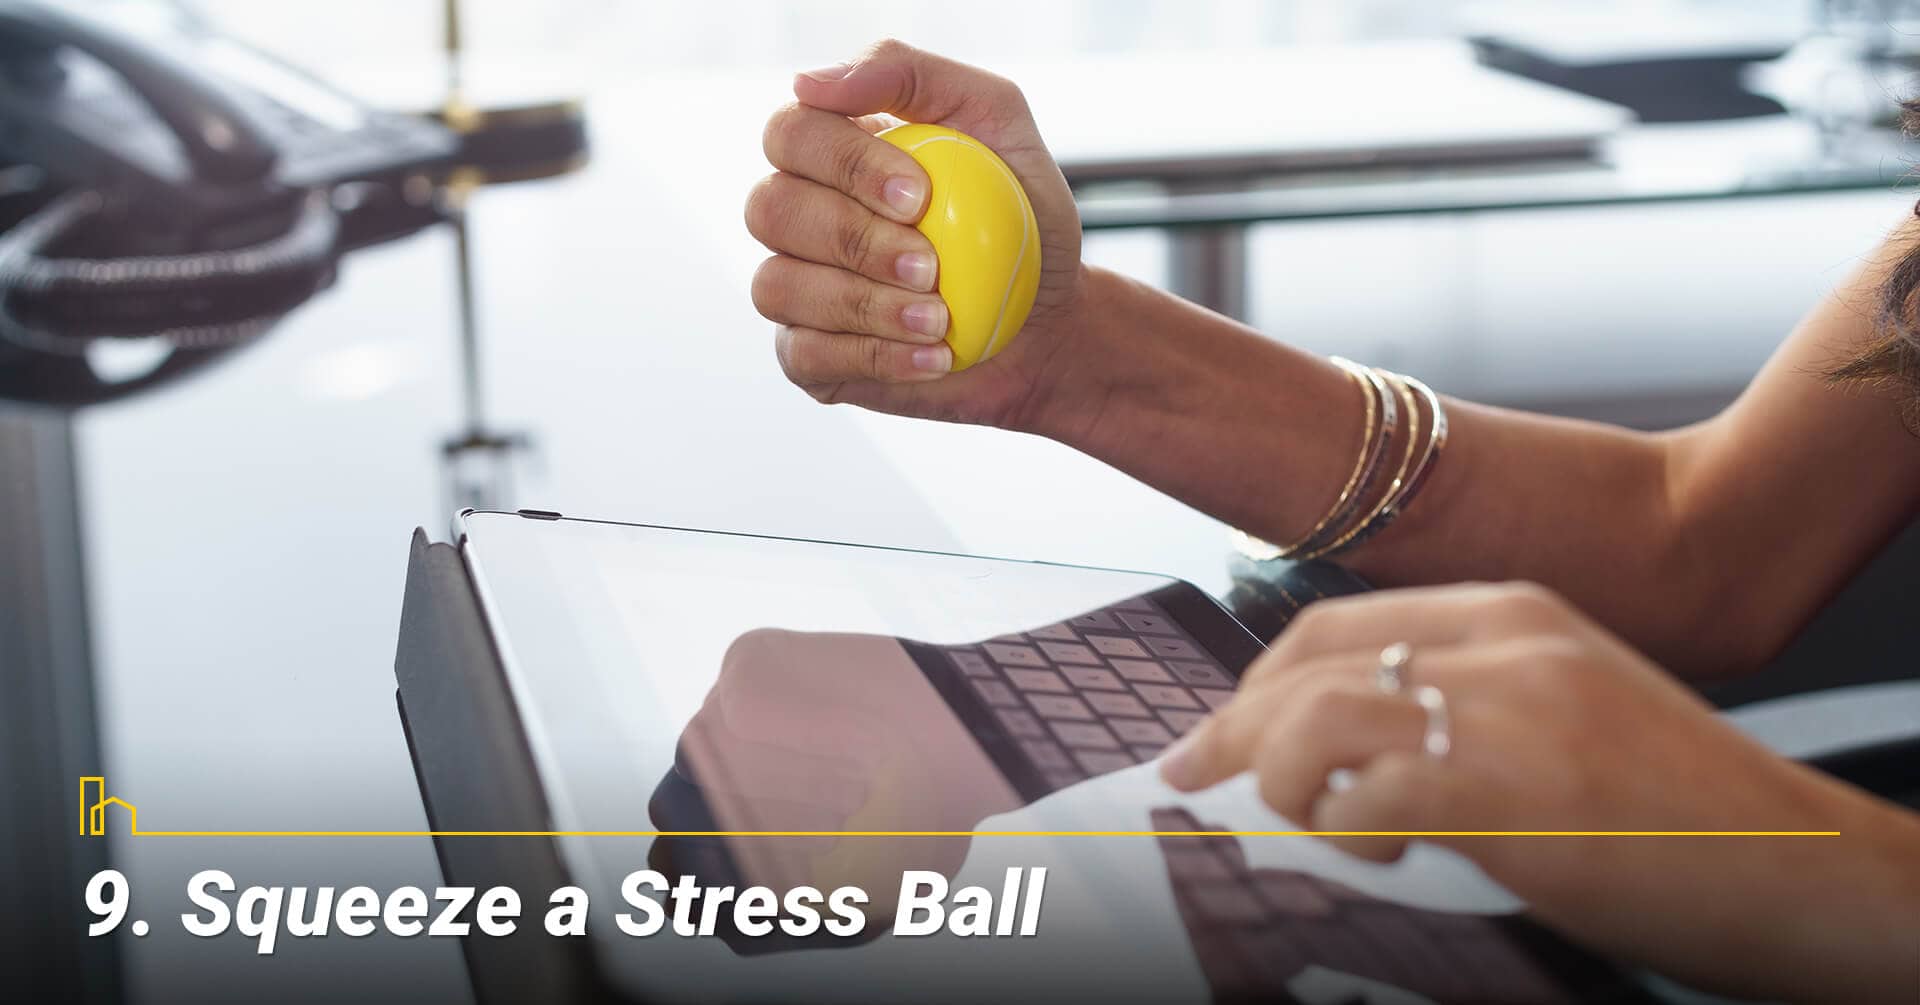 Squeeze a Stress Ball, keep stress level low